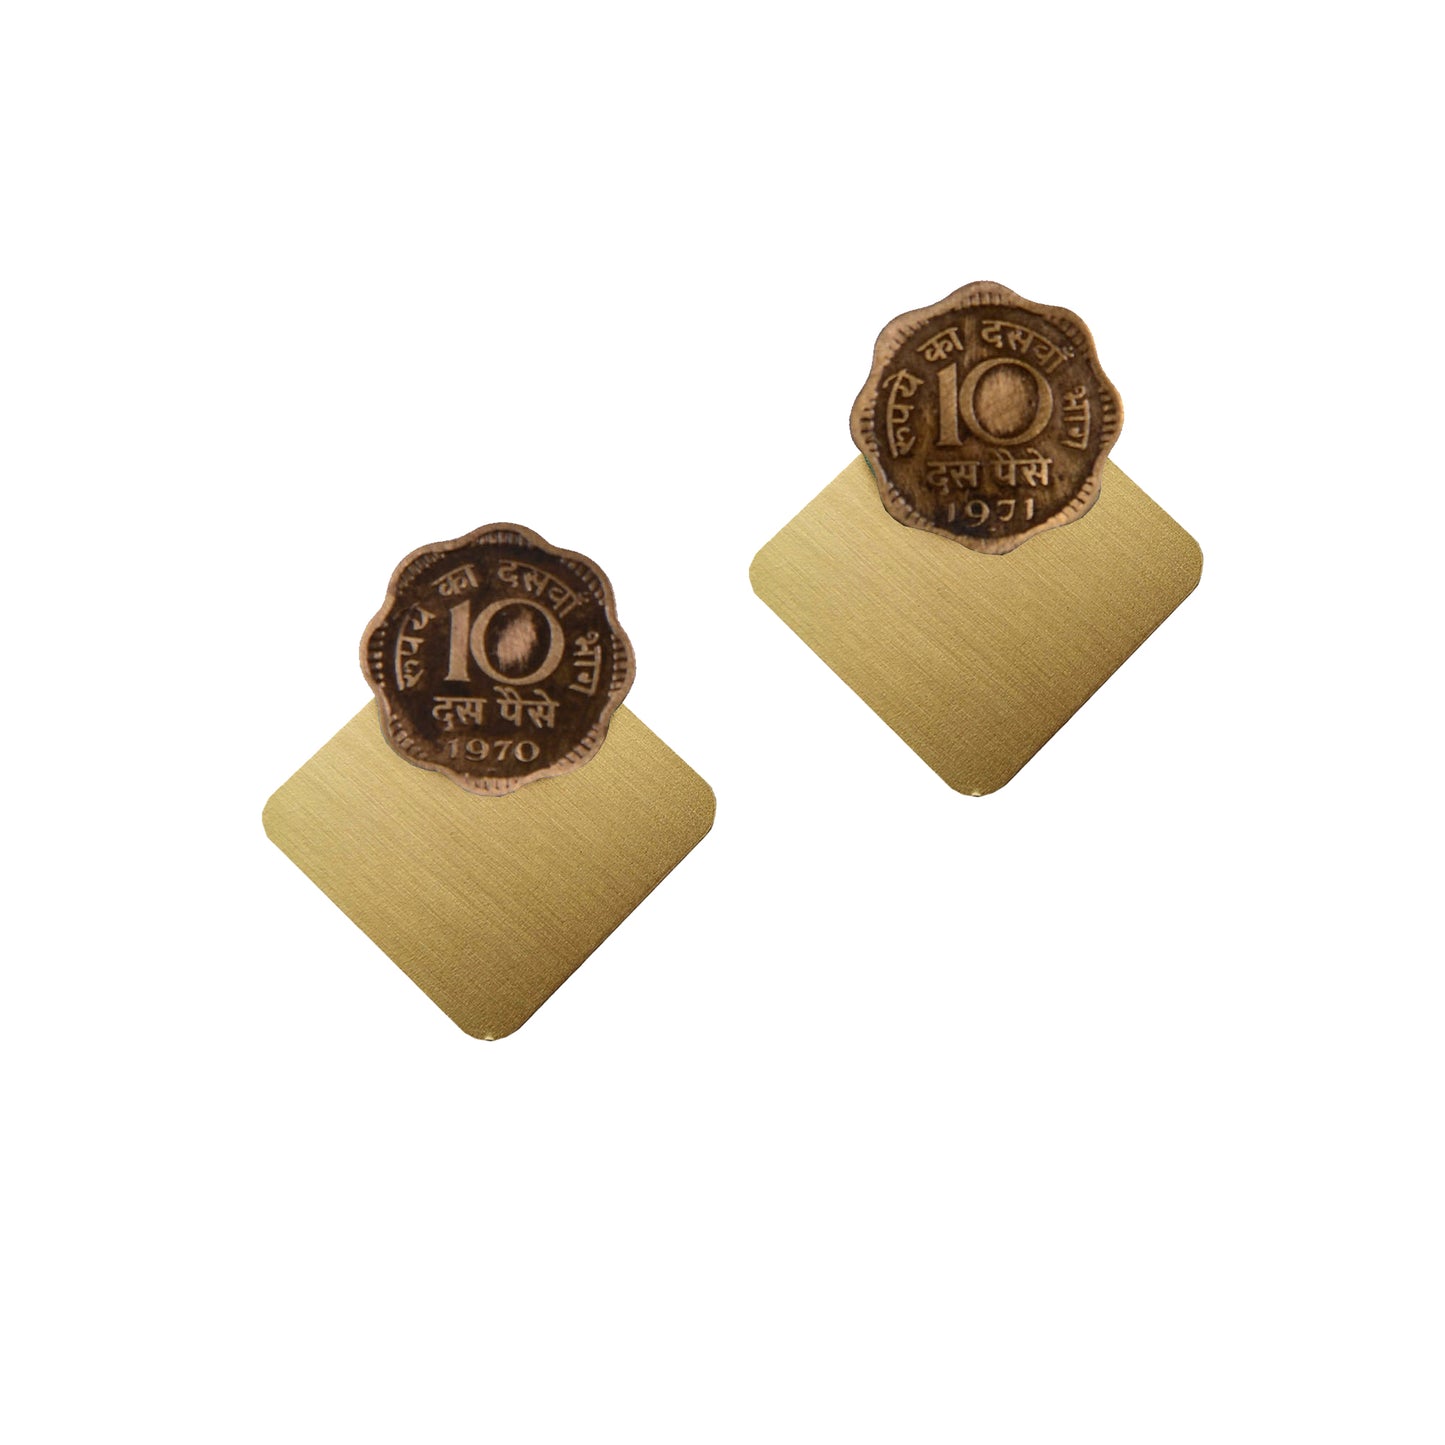 10 paise brass-square earjackets